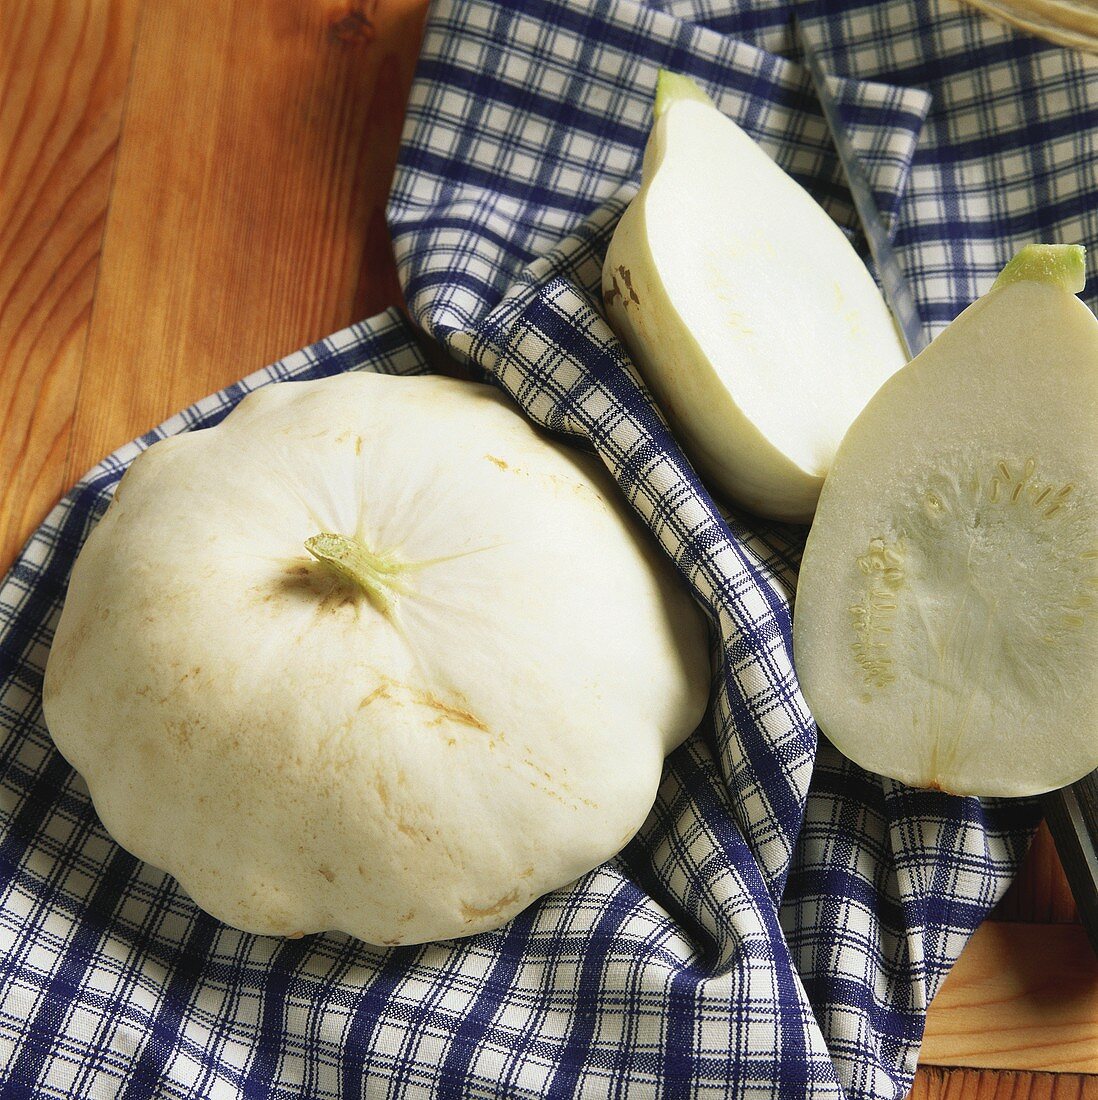 Two White Pumpkins on a Dish Towel